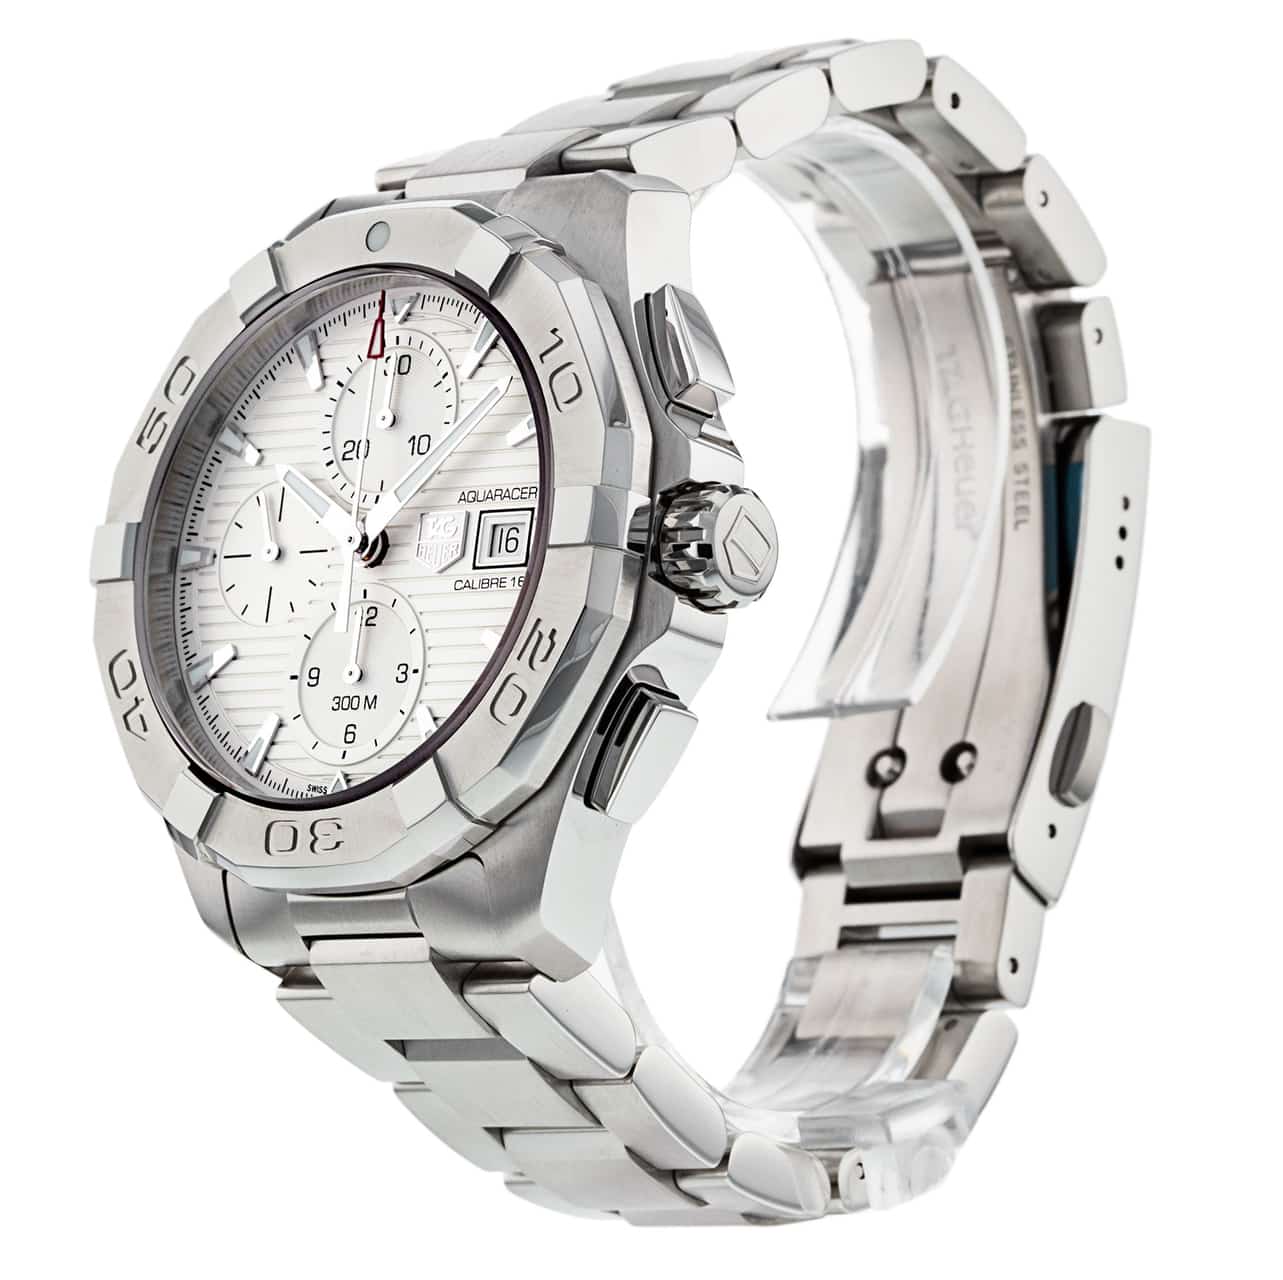 Tag Heuer Aquaracer Caliber 16 Automatic Chronograph White Dial Silver Steel Strap Watch for Men - CAY2111.BA0927